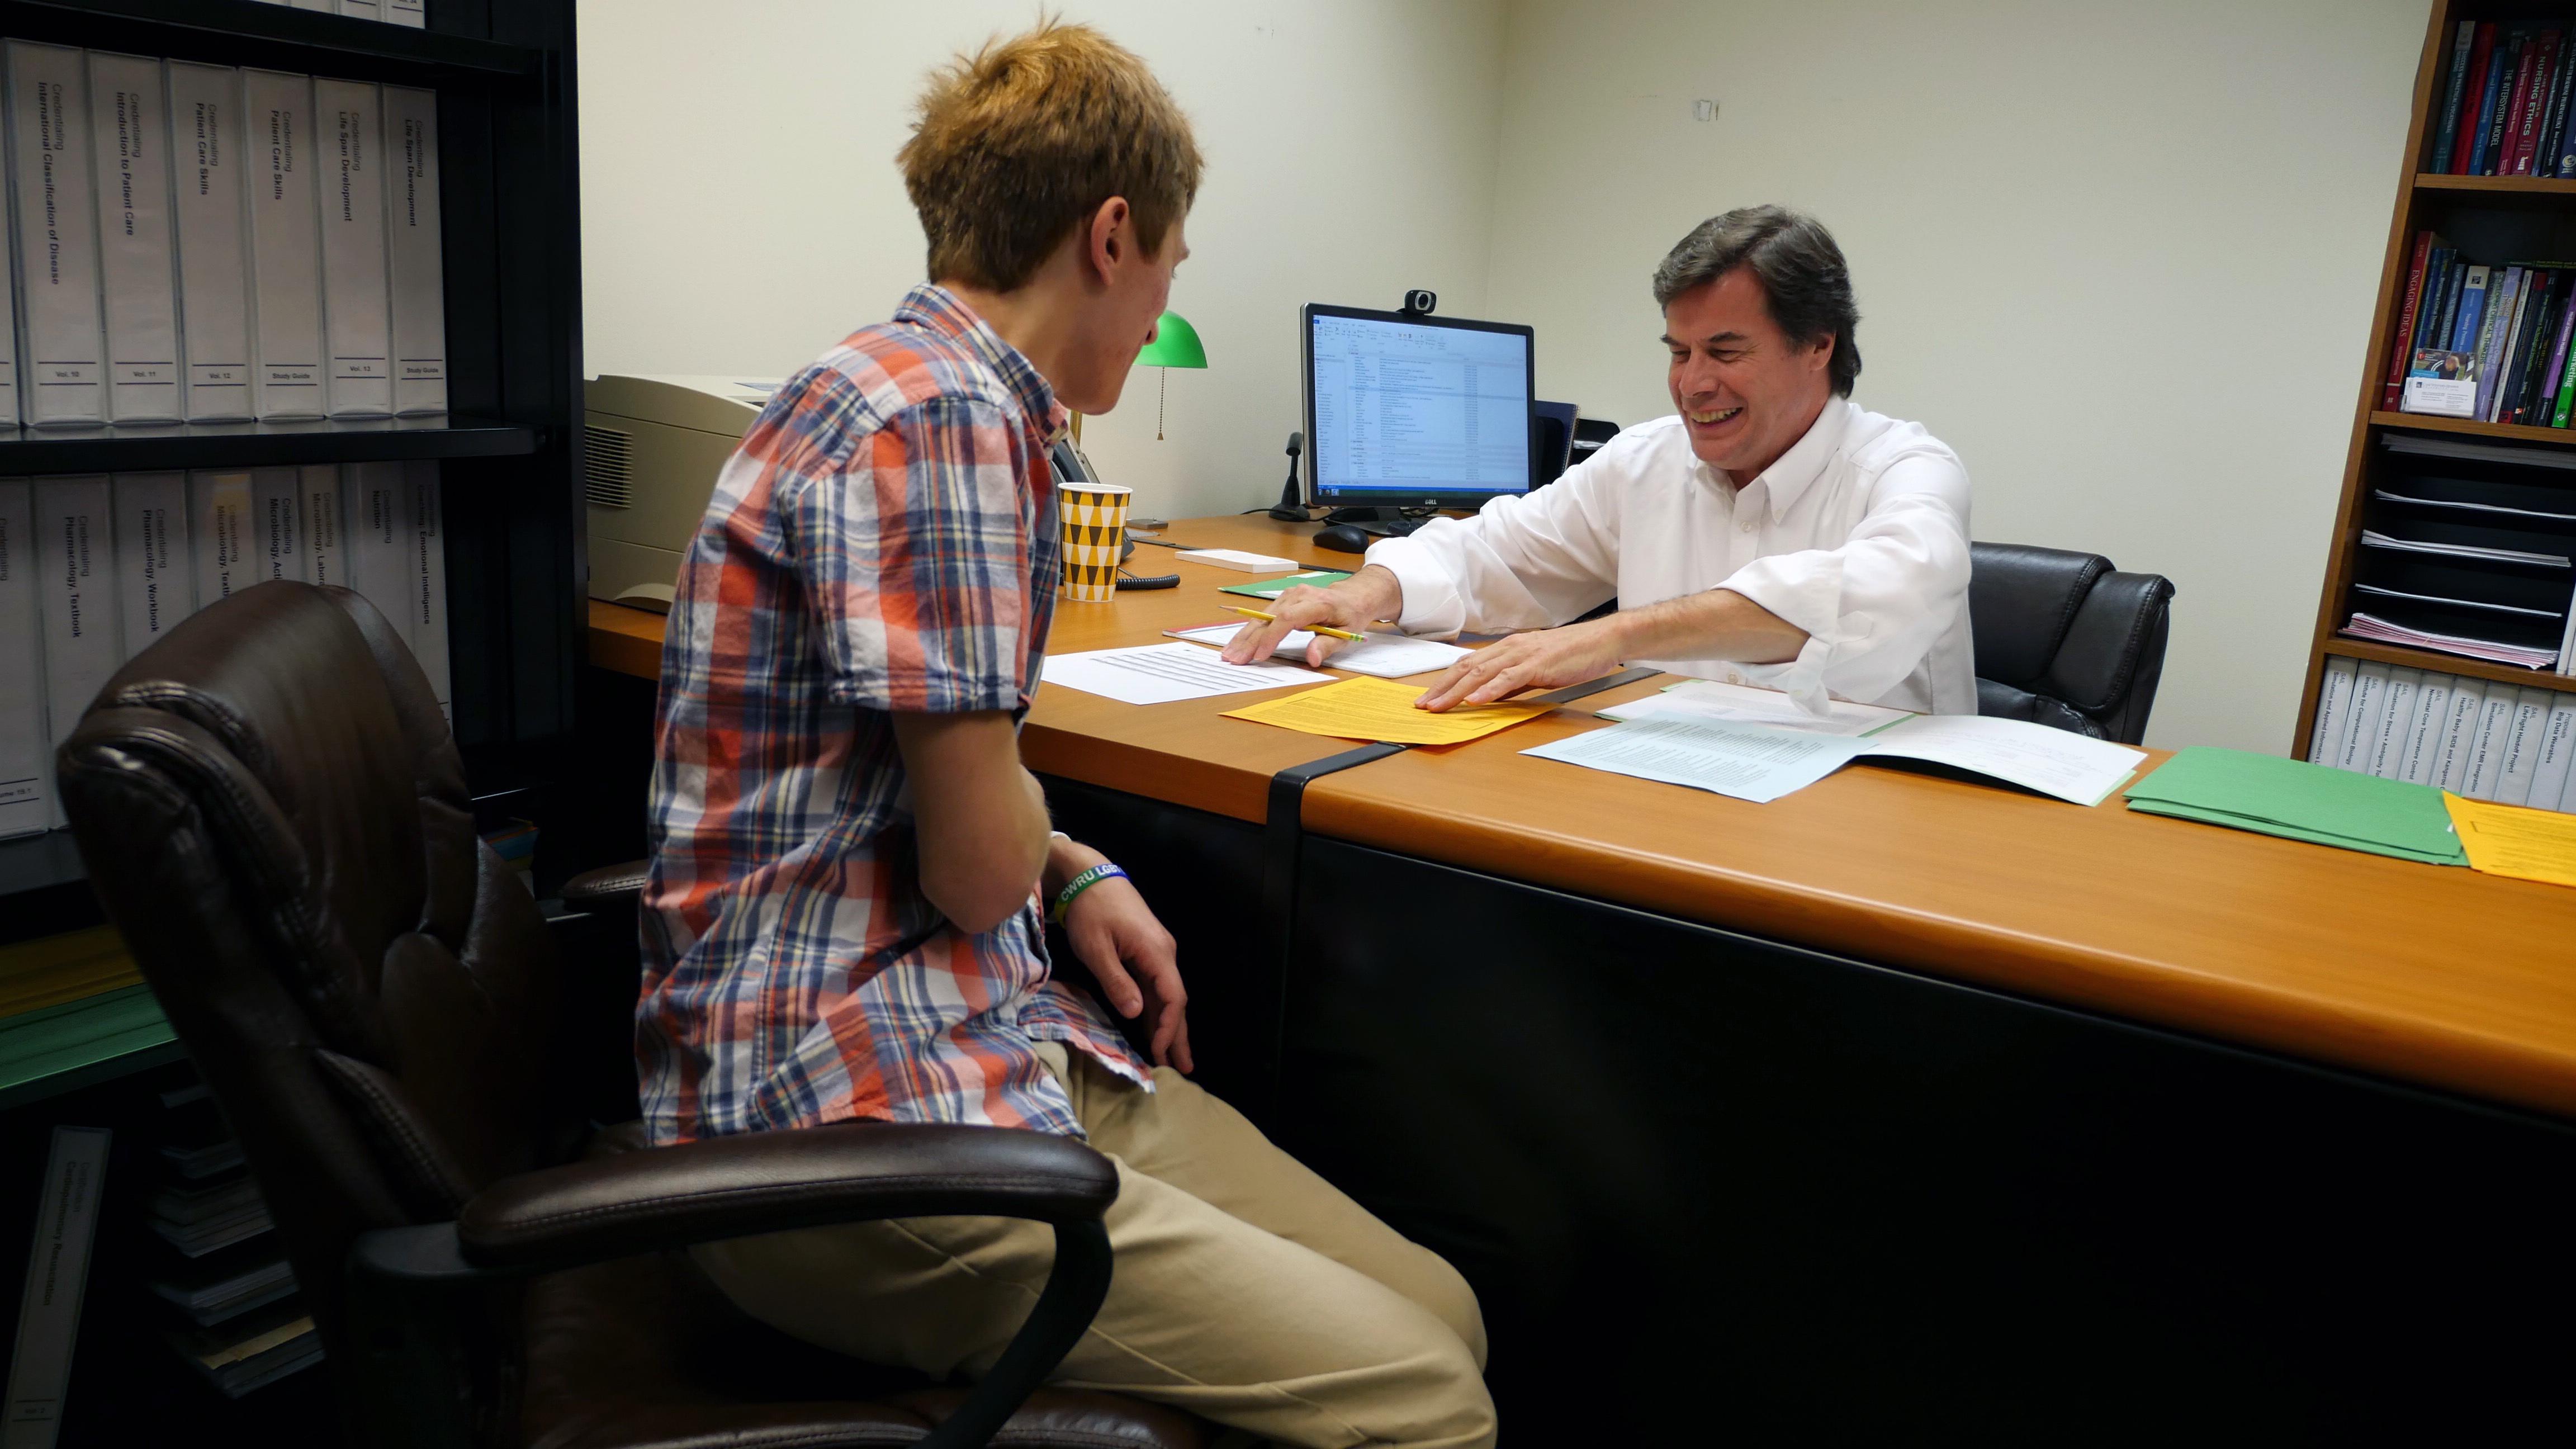 white male faculty member at desk with a white male student